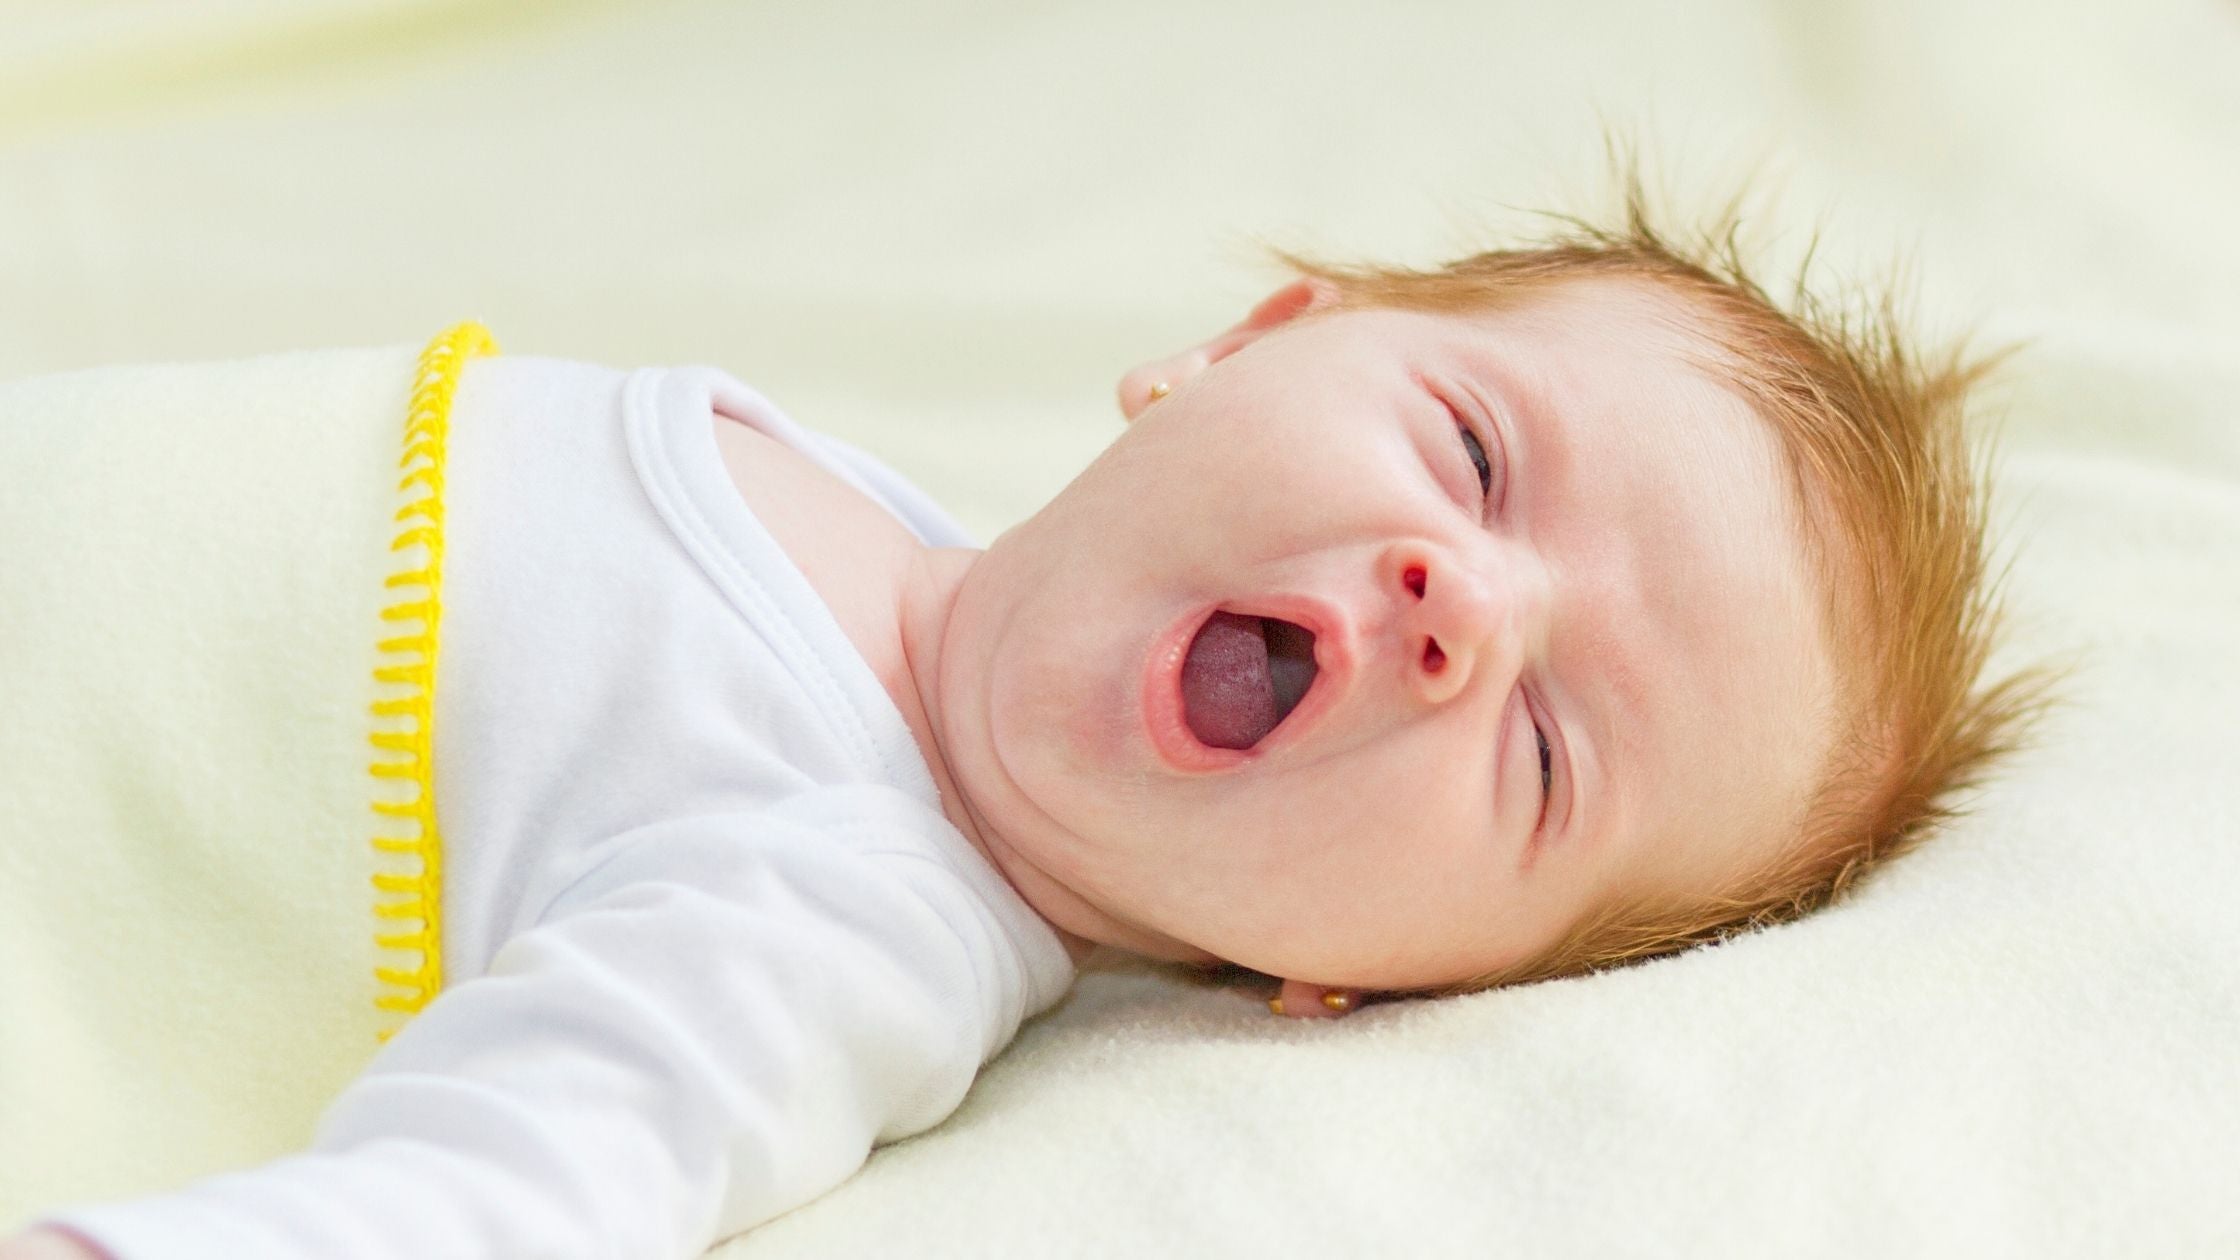 Sighing Done By Babies? Good and Bad: Repeated Sighing or Yawning Suggests Possible Unsatisfactory Breathing